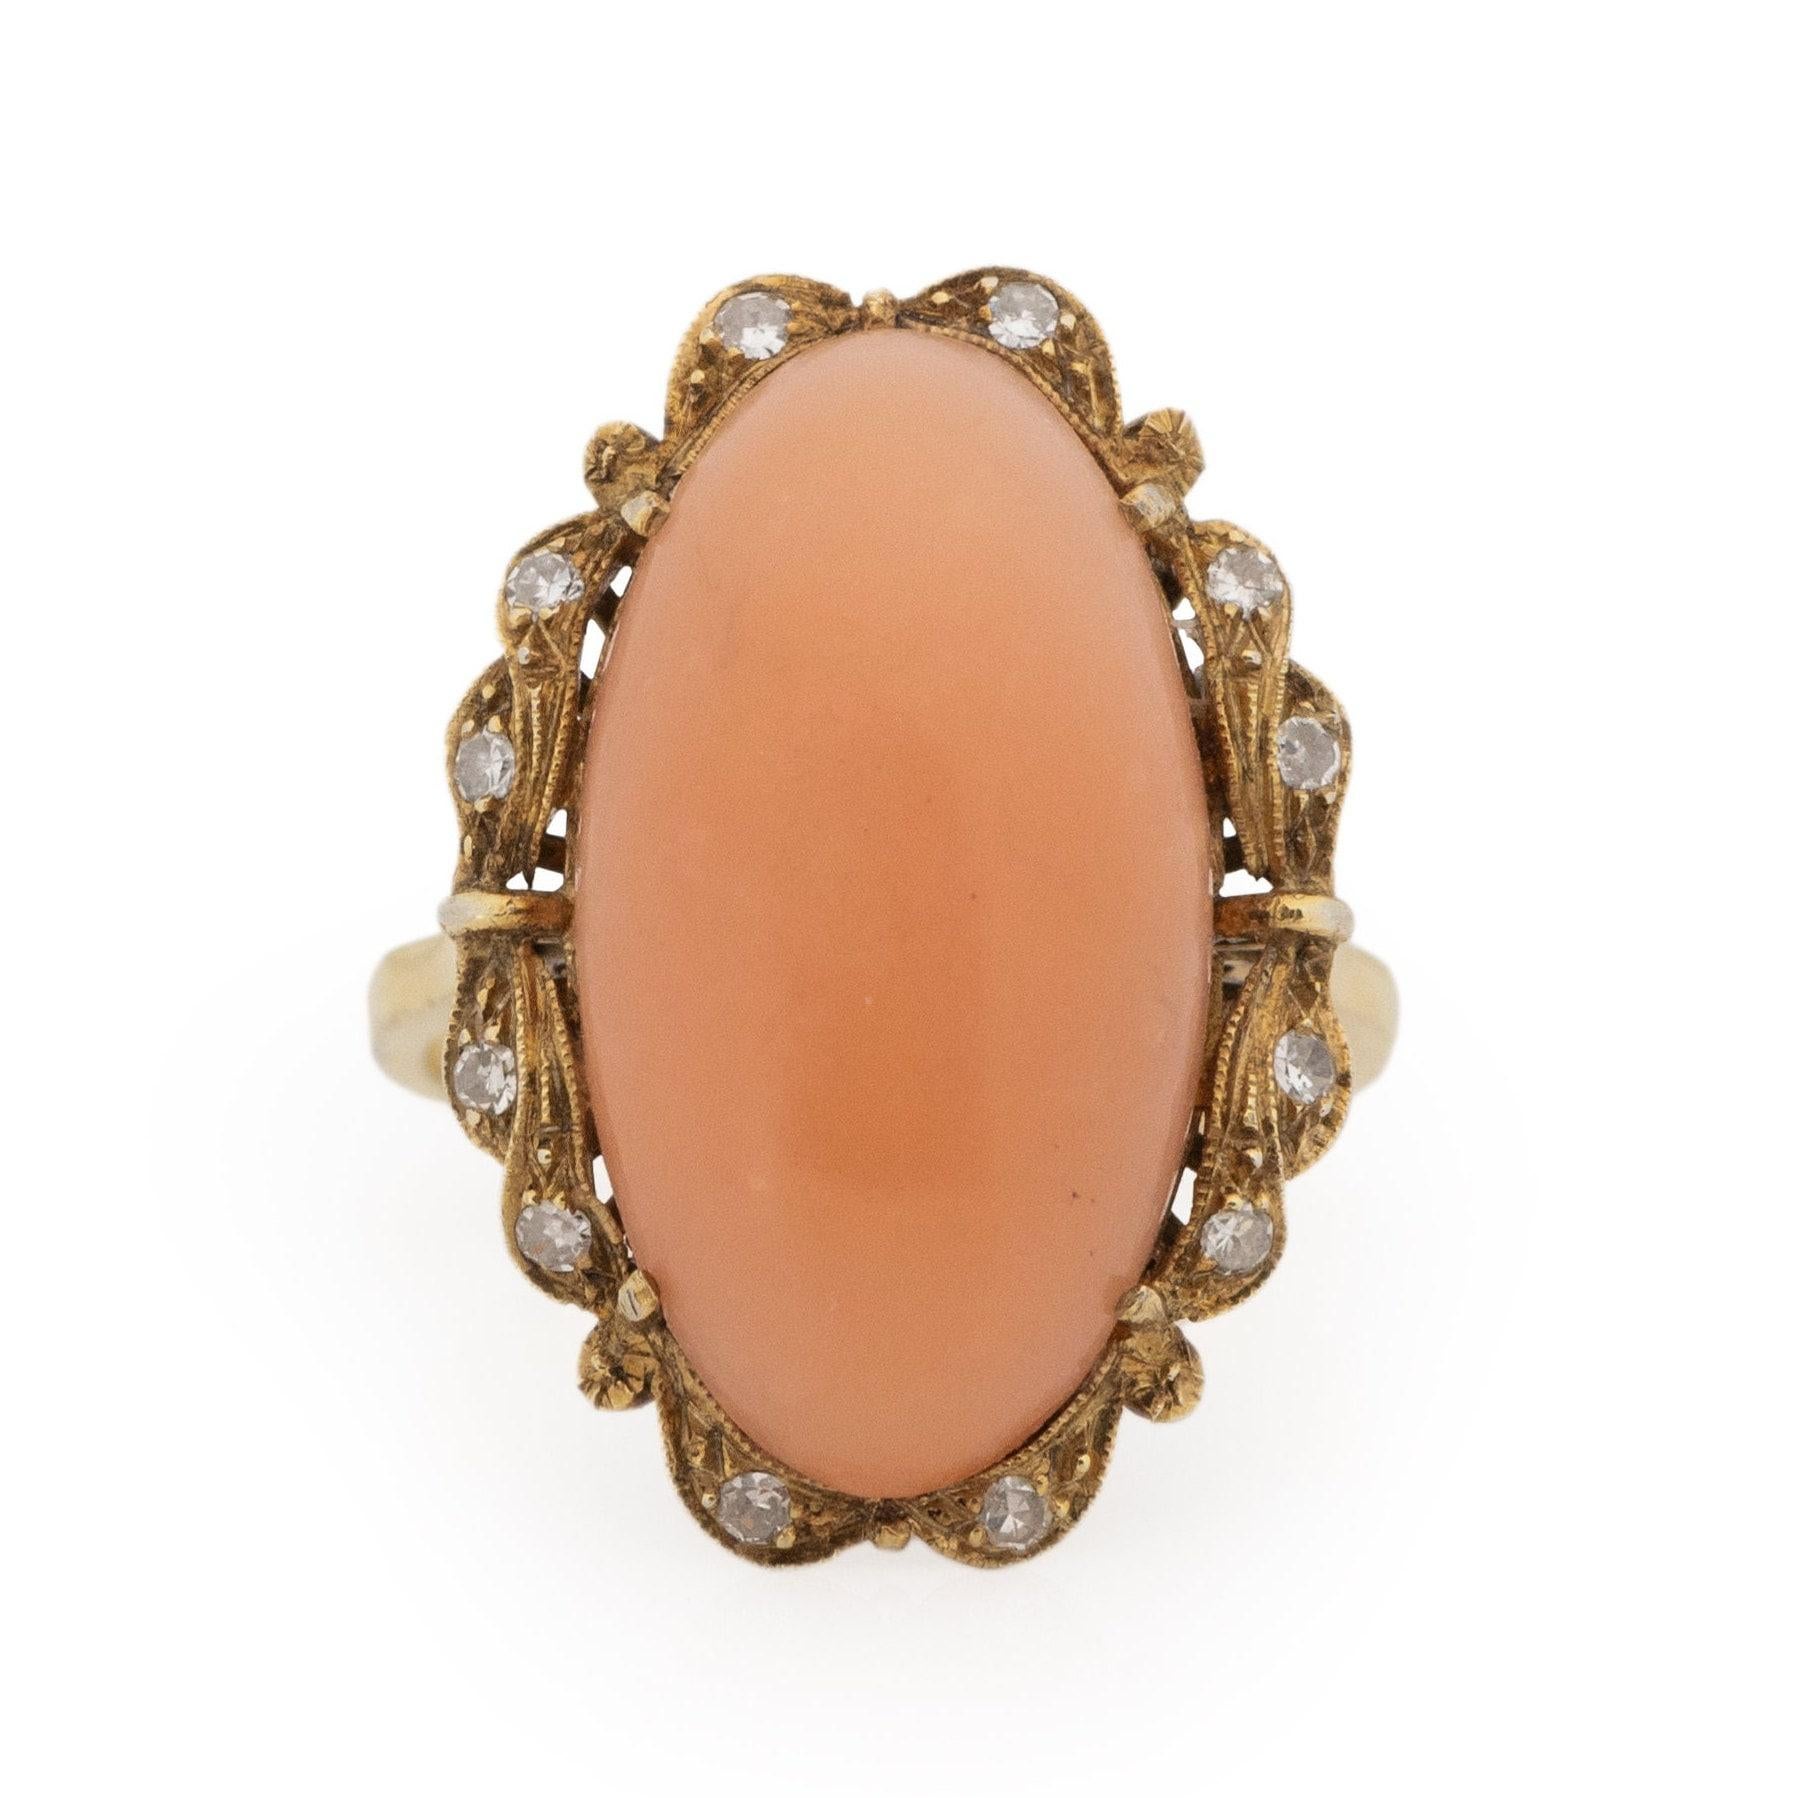 This Victorian masterpiece is meticulously crafted from opulent 18K yellow gold. The gracefully tapered shanks gently guide the gaze toward a refined gallery. Nestled within this gallery is a stunning oval cabochon coral, displaying a delicate